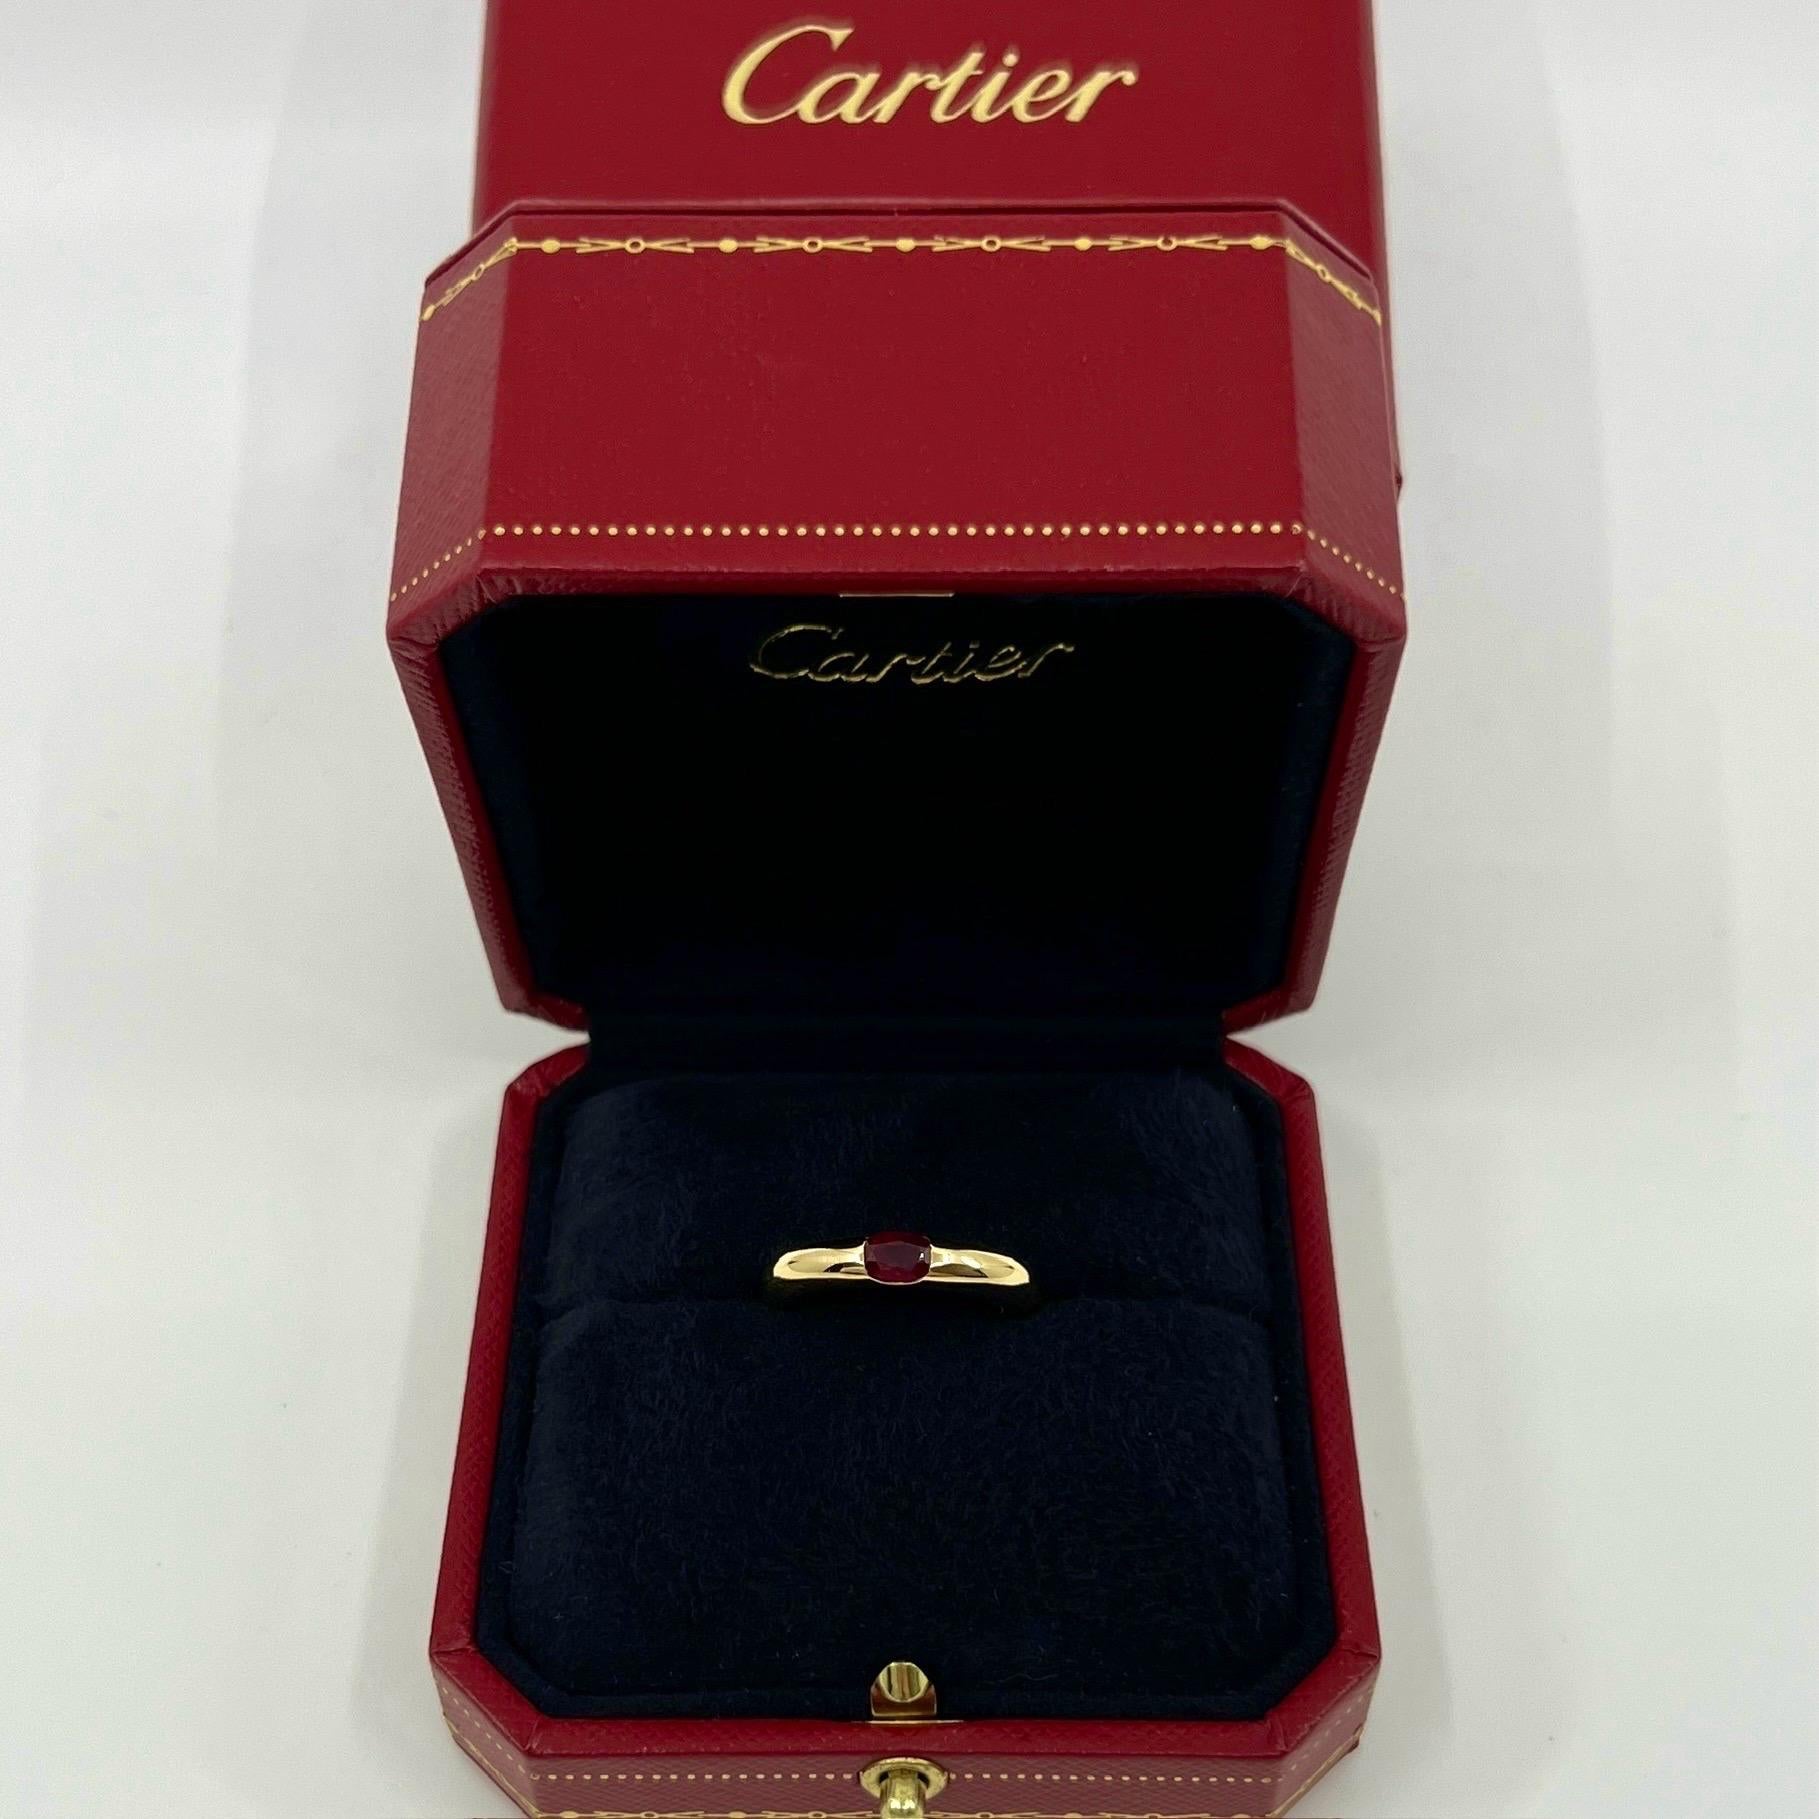 Vintage Cartier Deep Red Ruby Ellipse 18k Yellow Gold Oval Solitaire Ring 52 US6 6